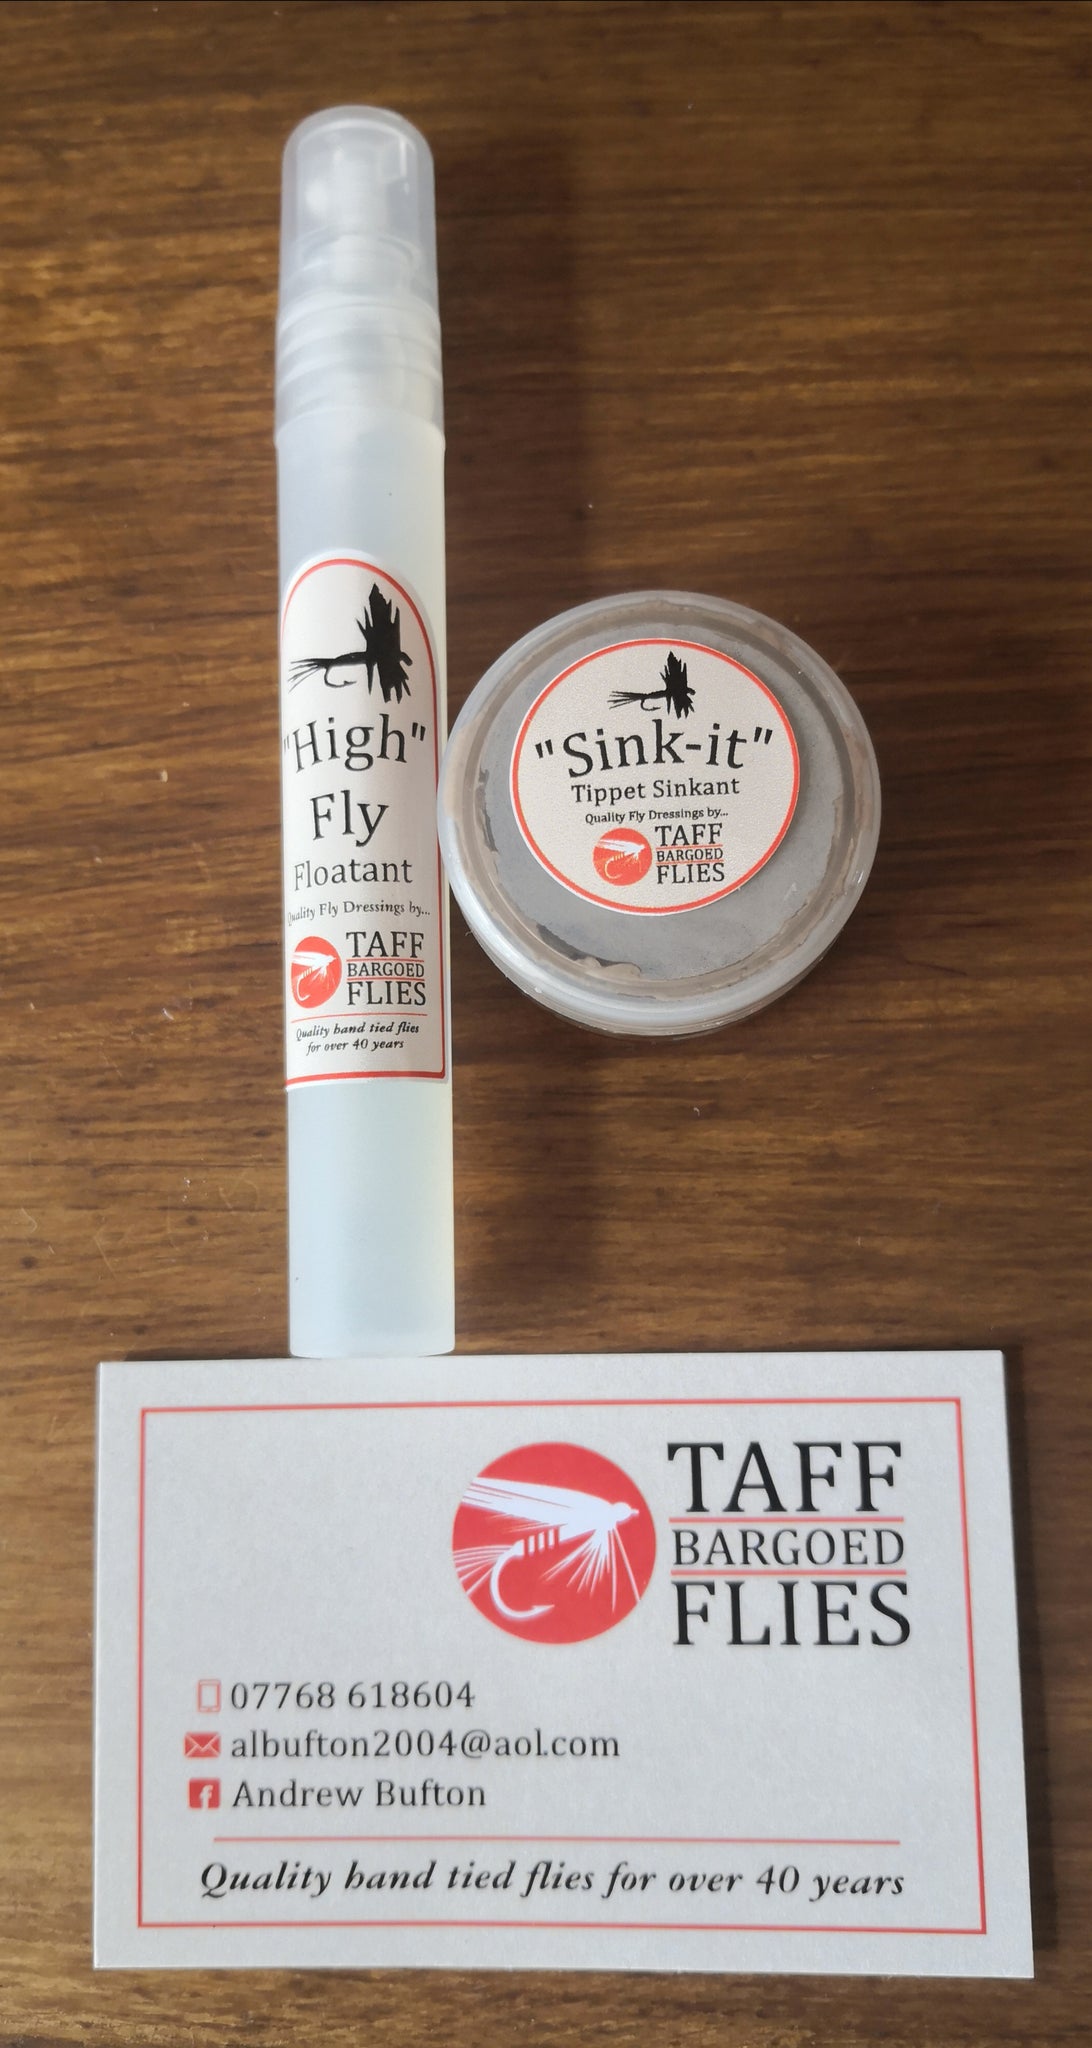 SET OF "HIGH FLY" FLOATANT AND "SINK-IT" LEADER SINK